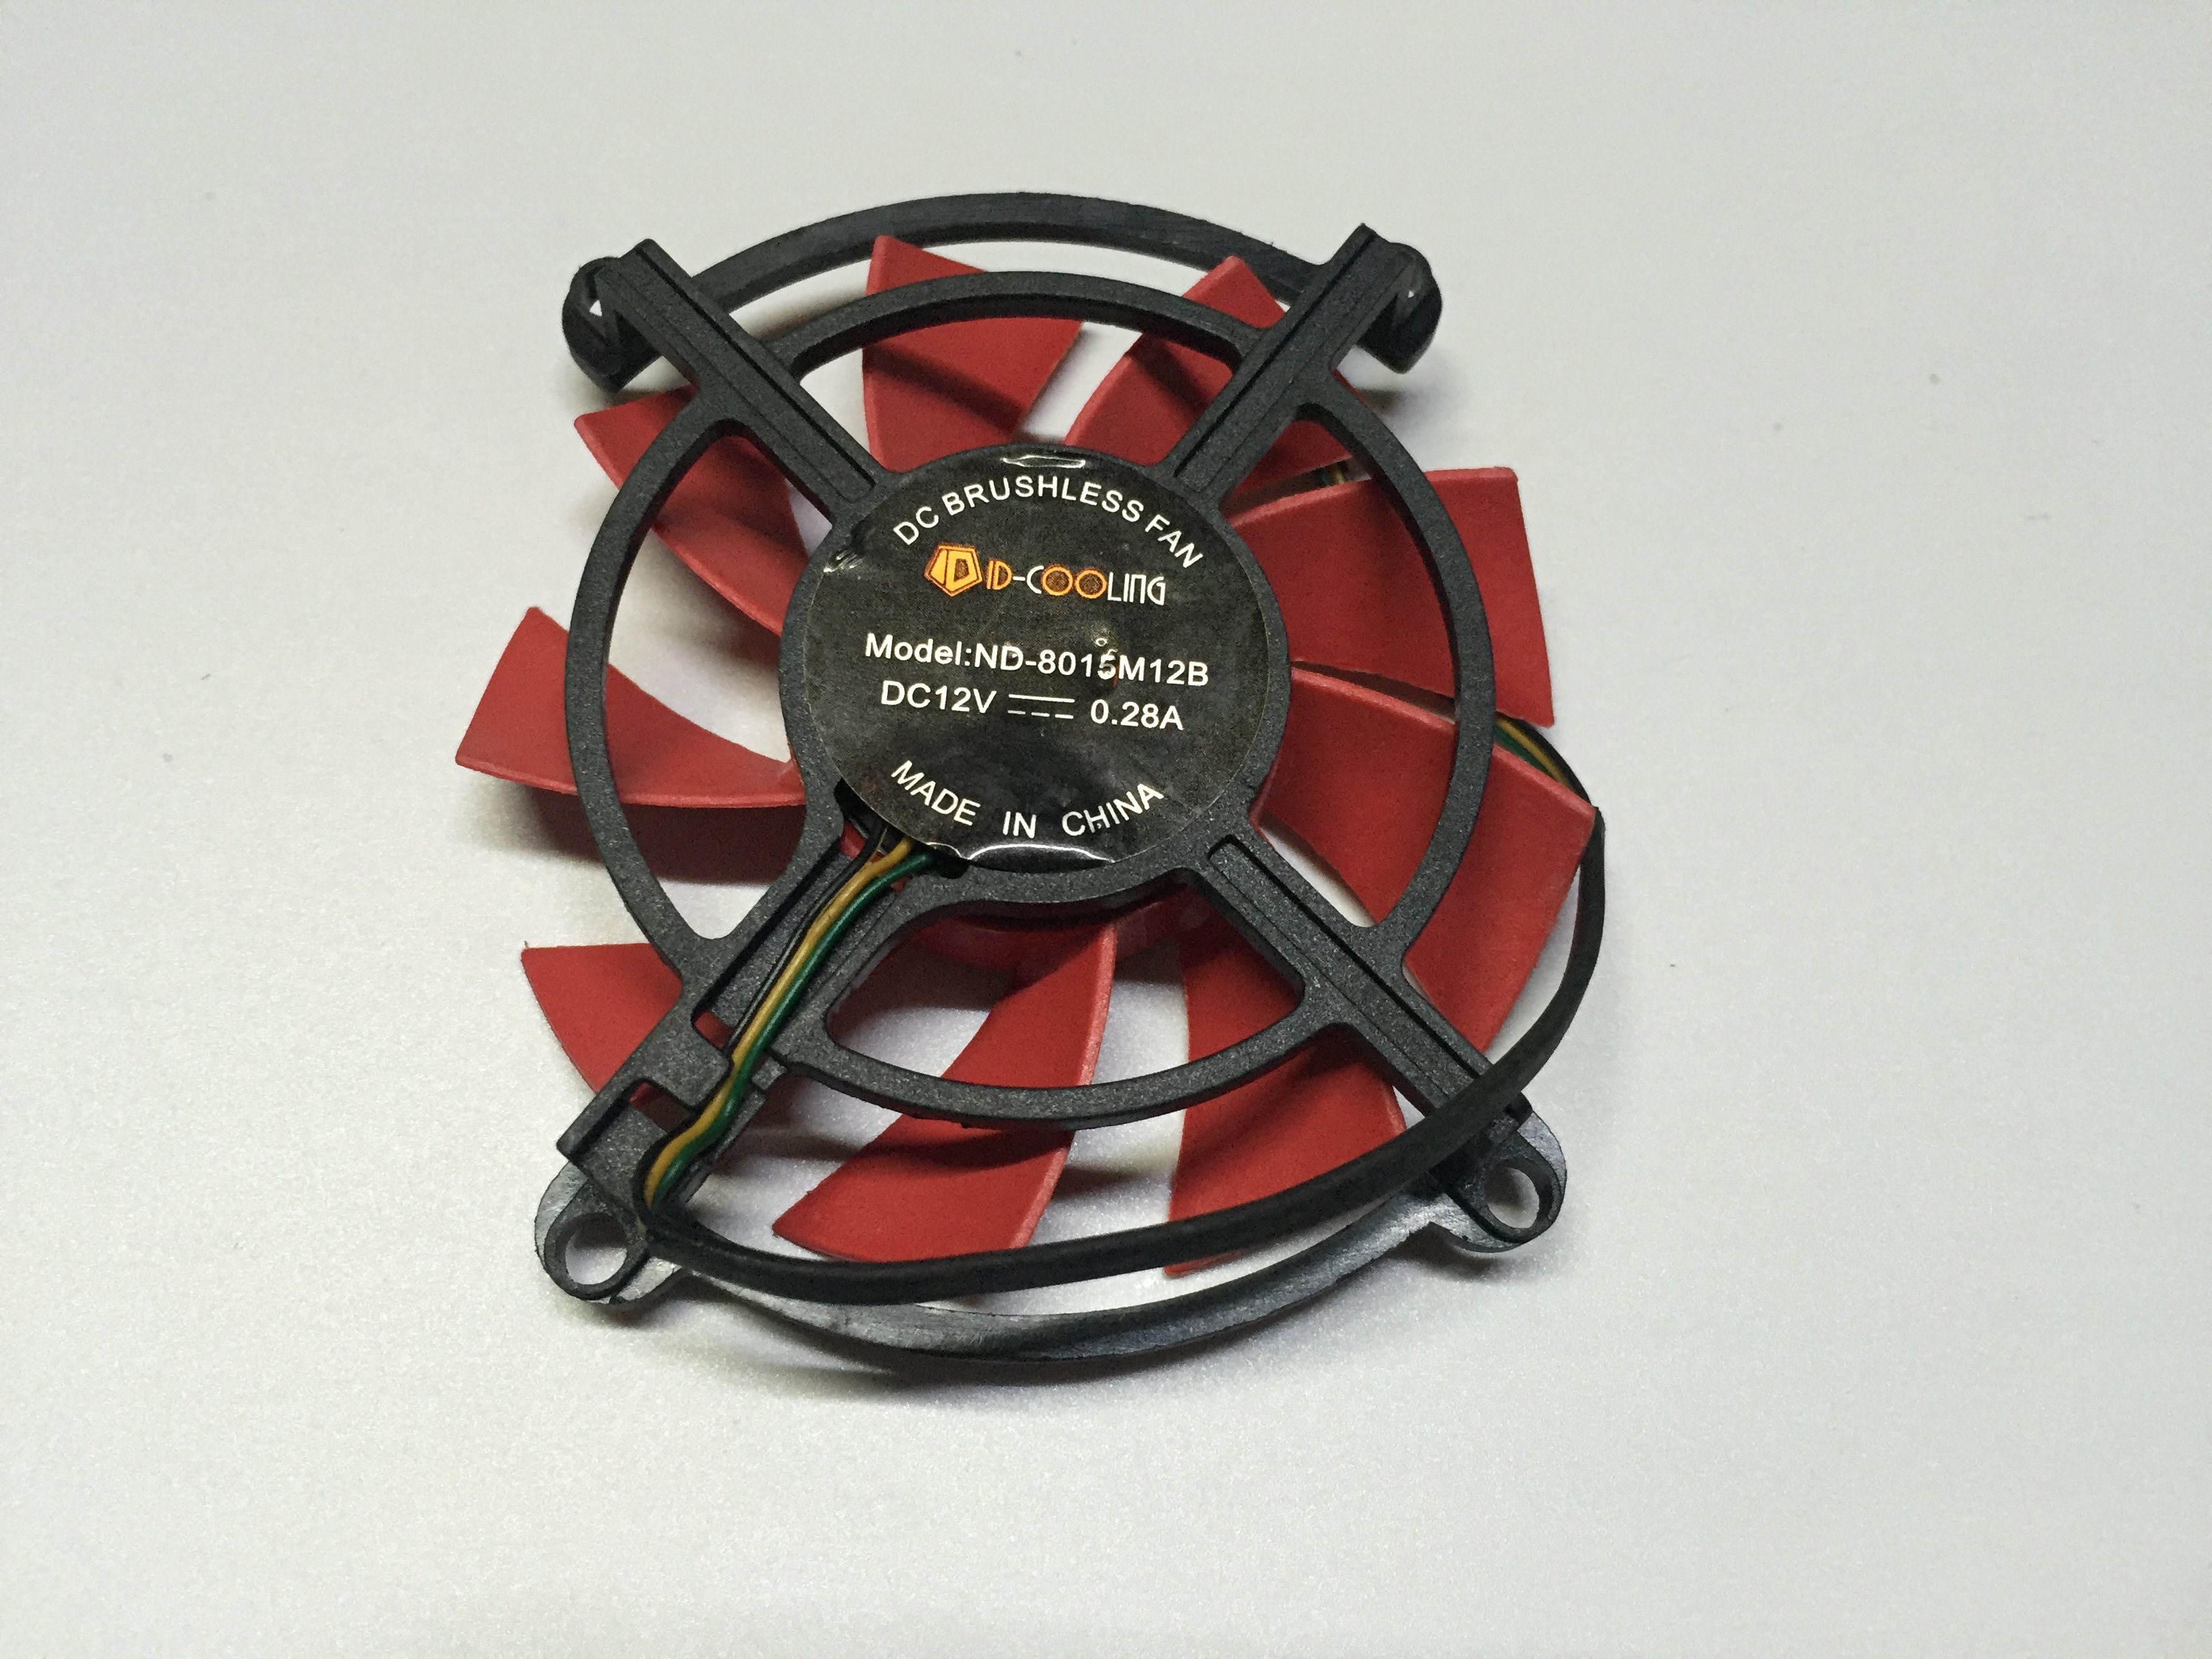 ASL GT740 GTX750 ND-8015M12B DC12V 0.18A 4Pin 3Wire Cooling Fan